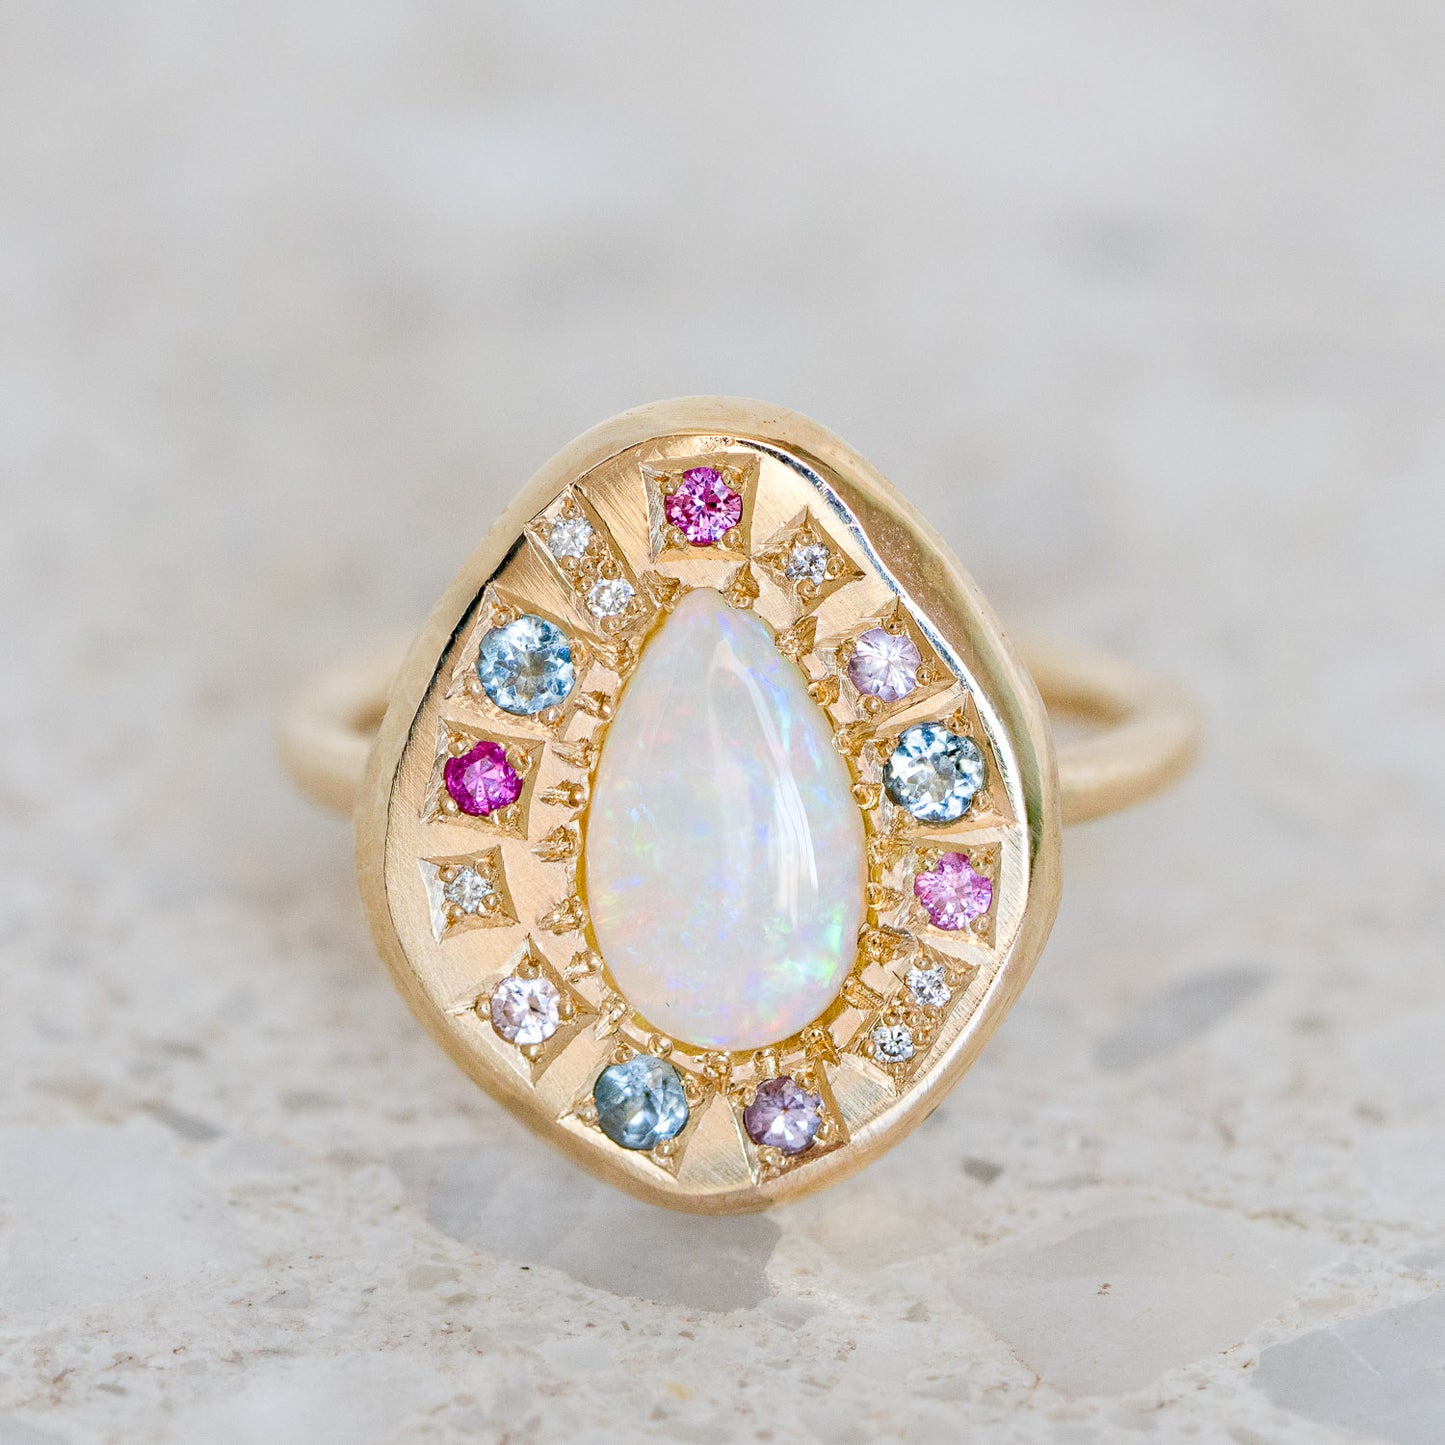 Buy Opal Ring Finger Ring Natural Amazing Opal Gemstone Ring Fire Stone  Boho Ring 925 Sterling Silver Solid Ring Handcrafted Charm Ring Online in  India - Etsy